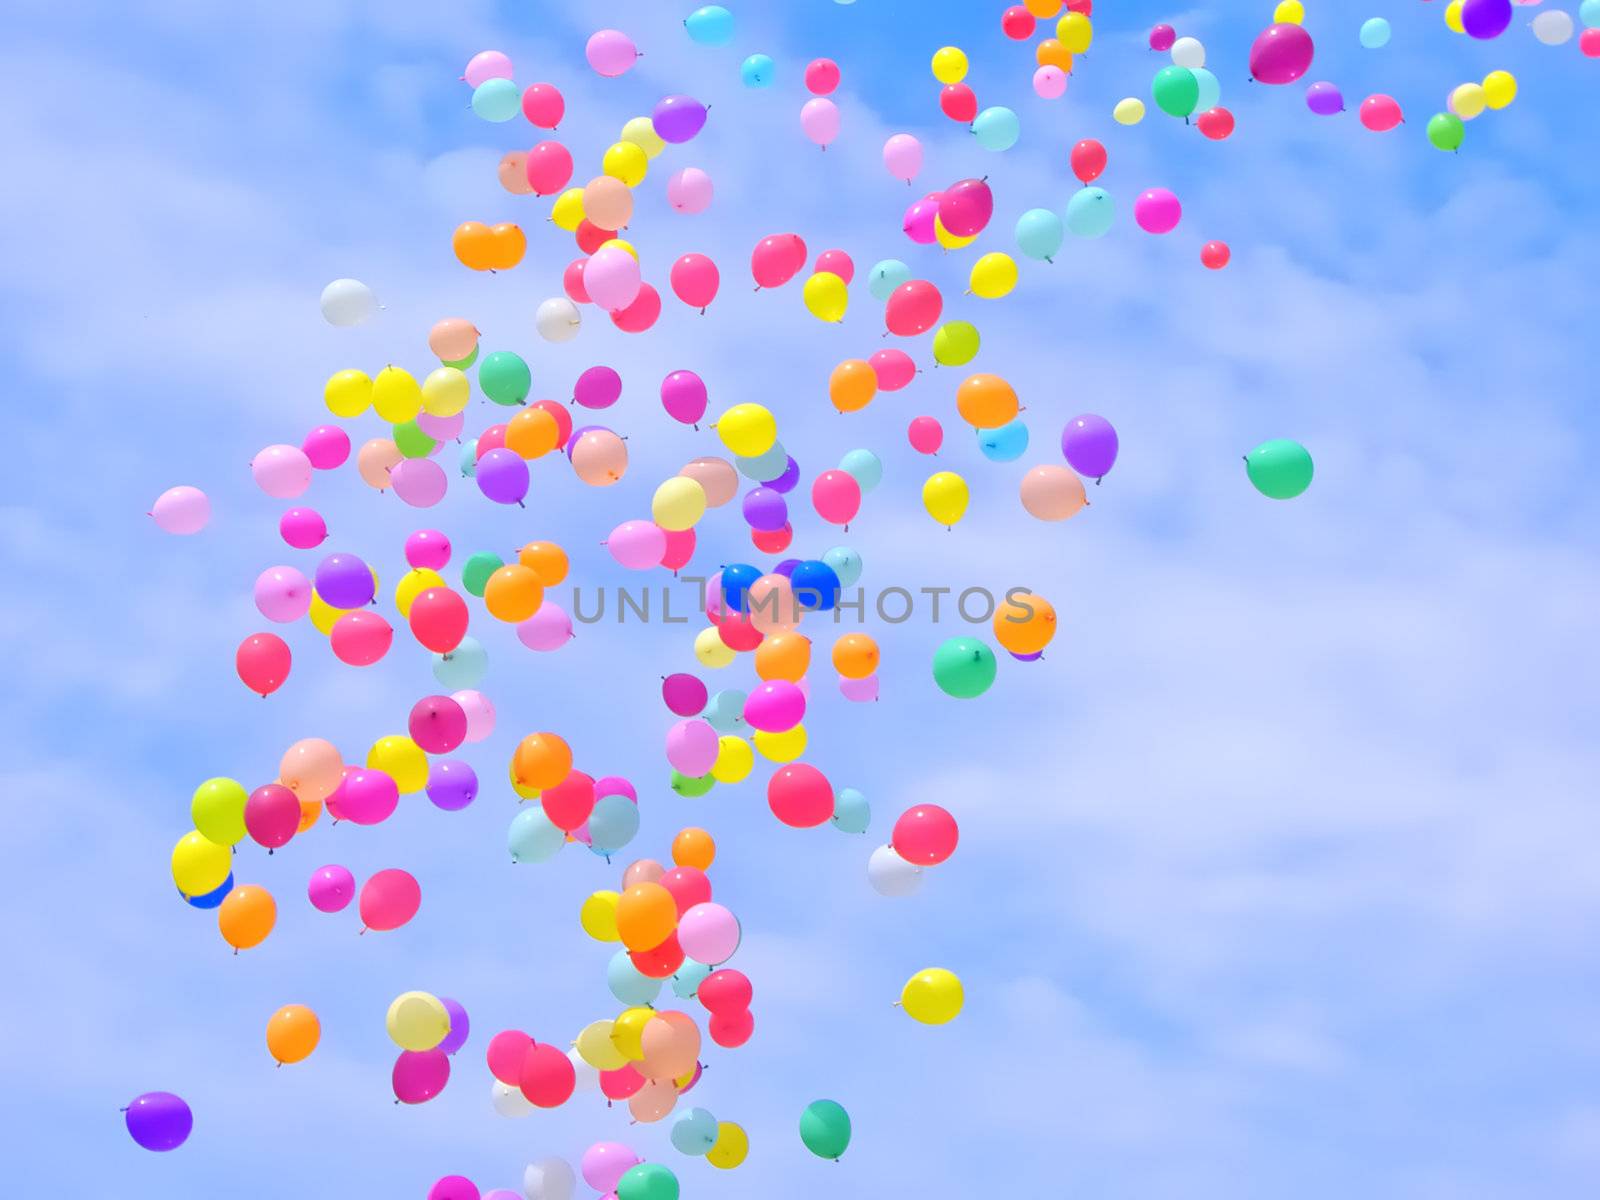 A lot of colorful balloons flying in the sky